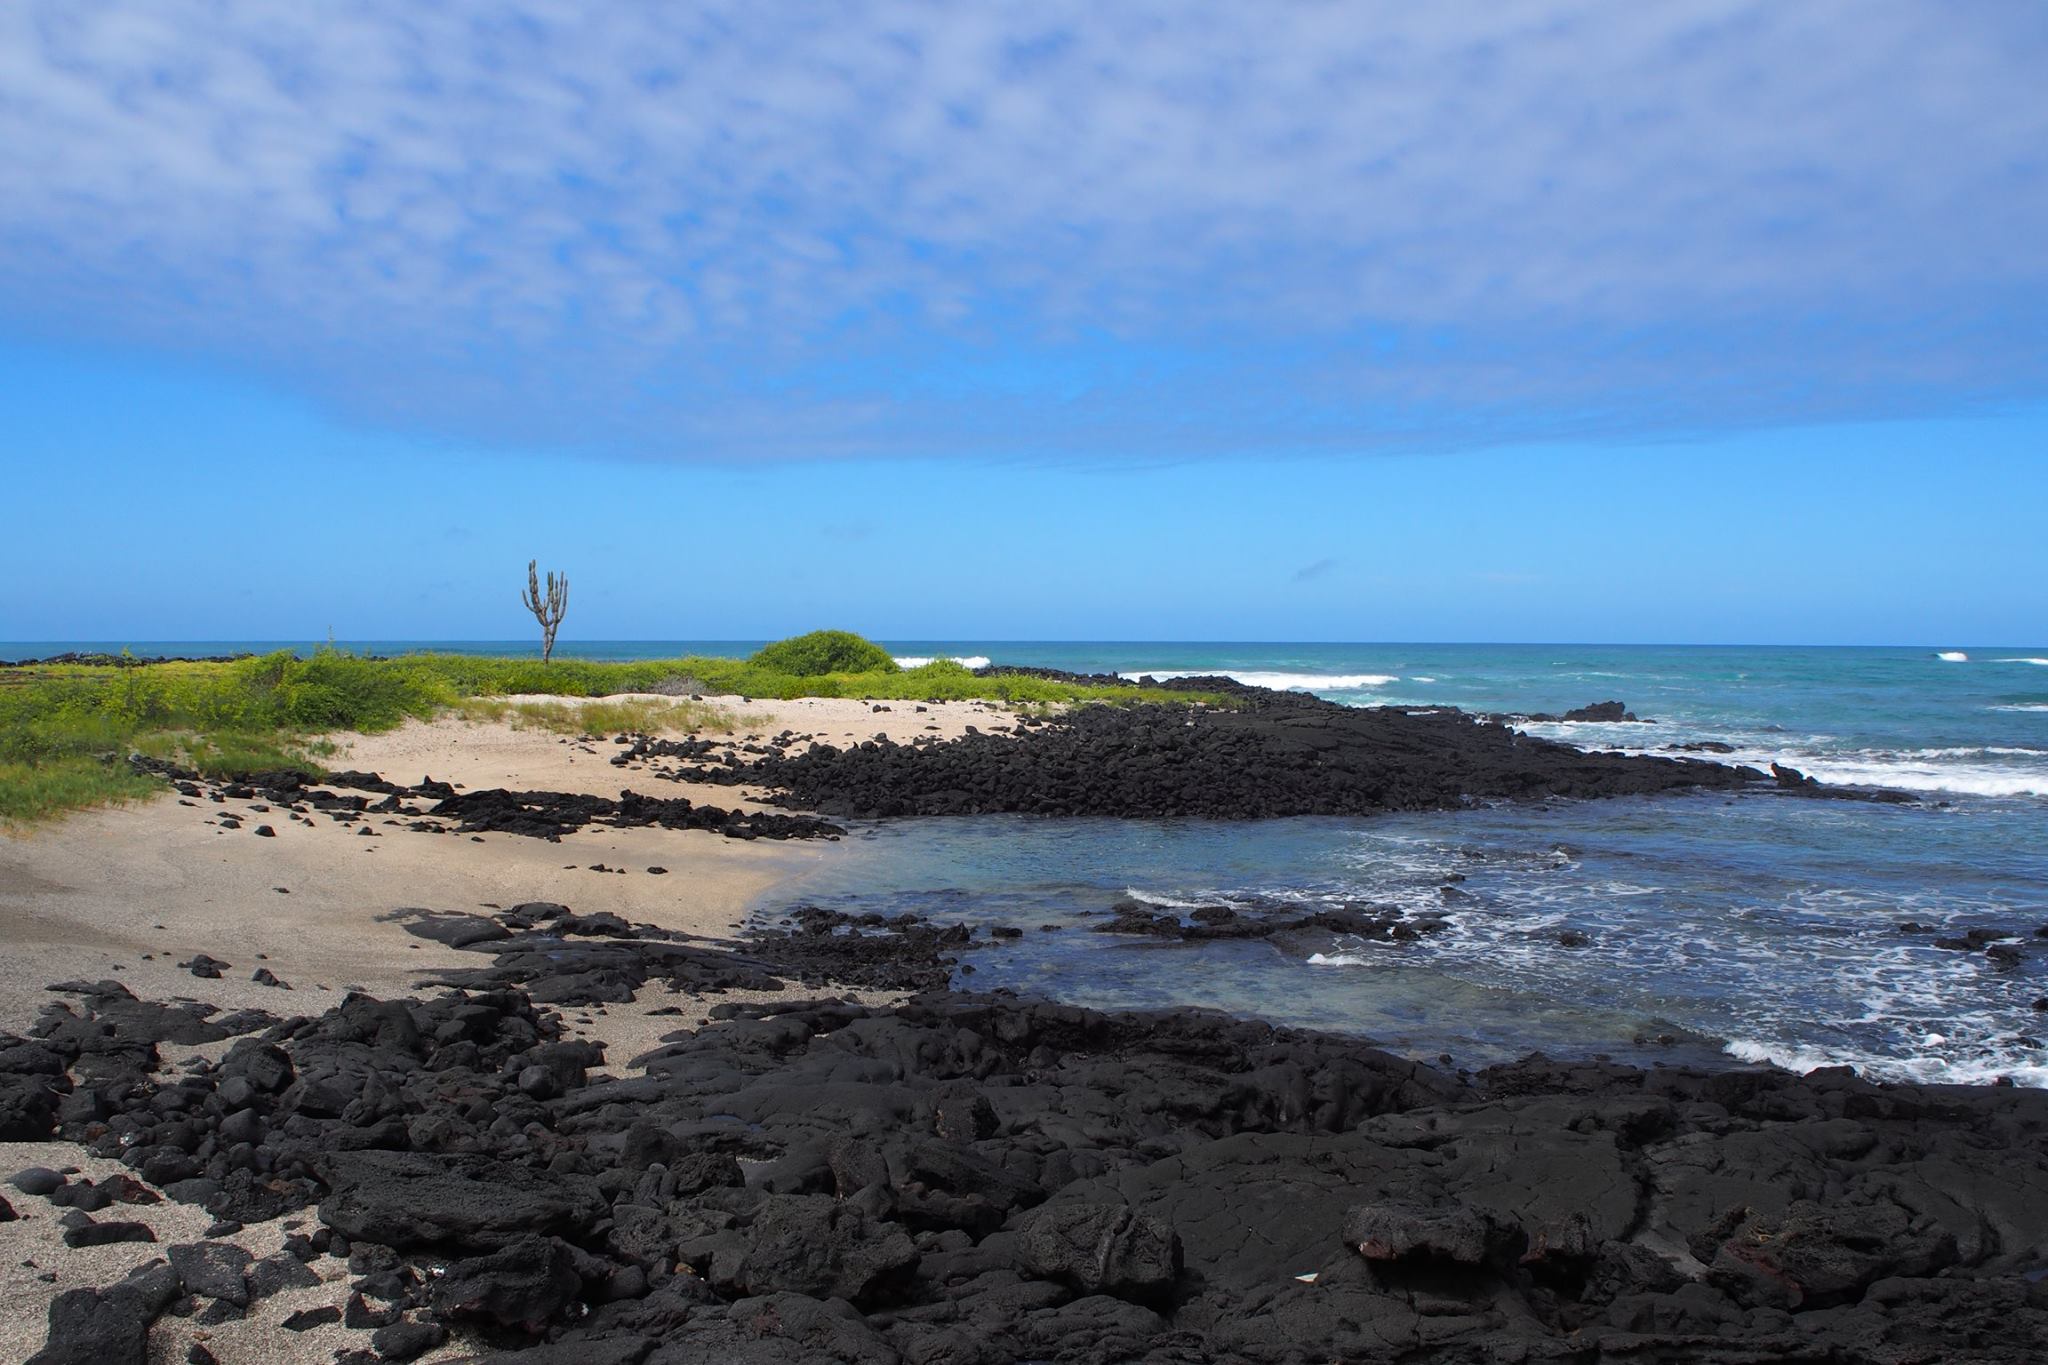 A stretch of beach near the Galapagos Science Center.